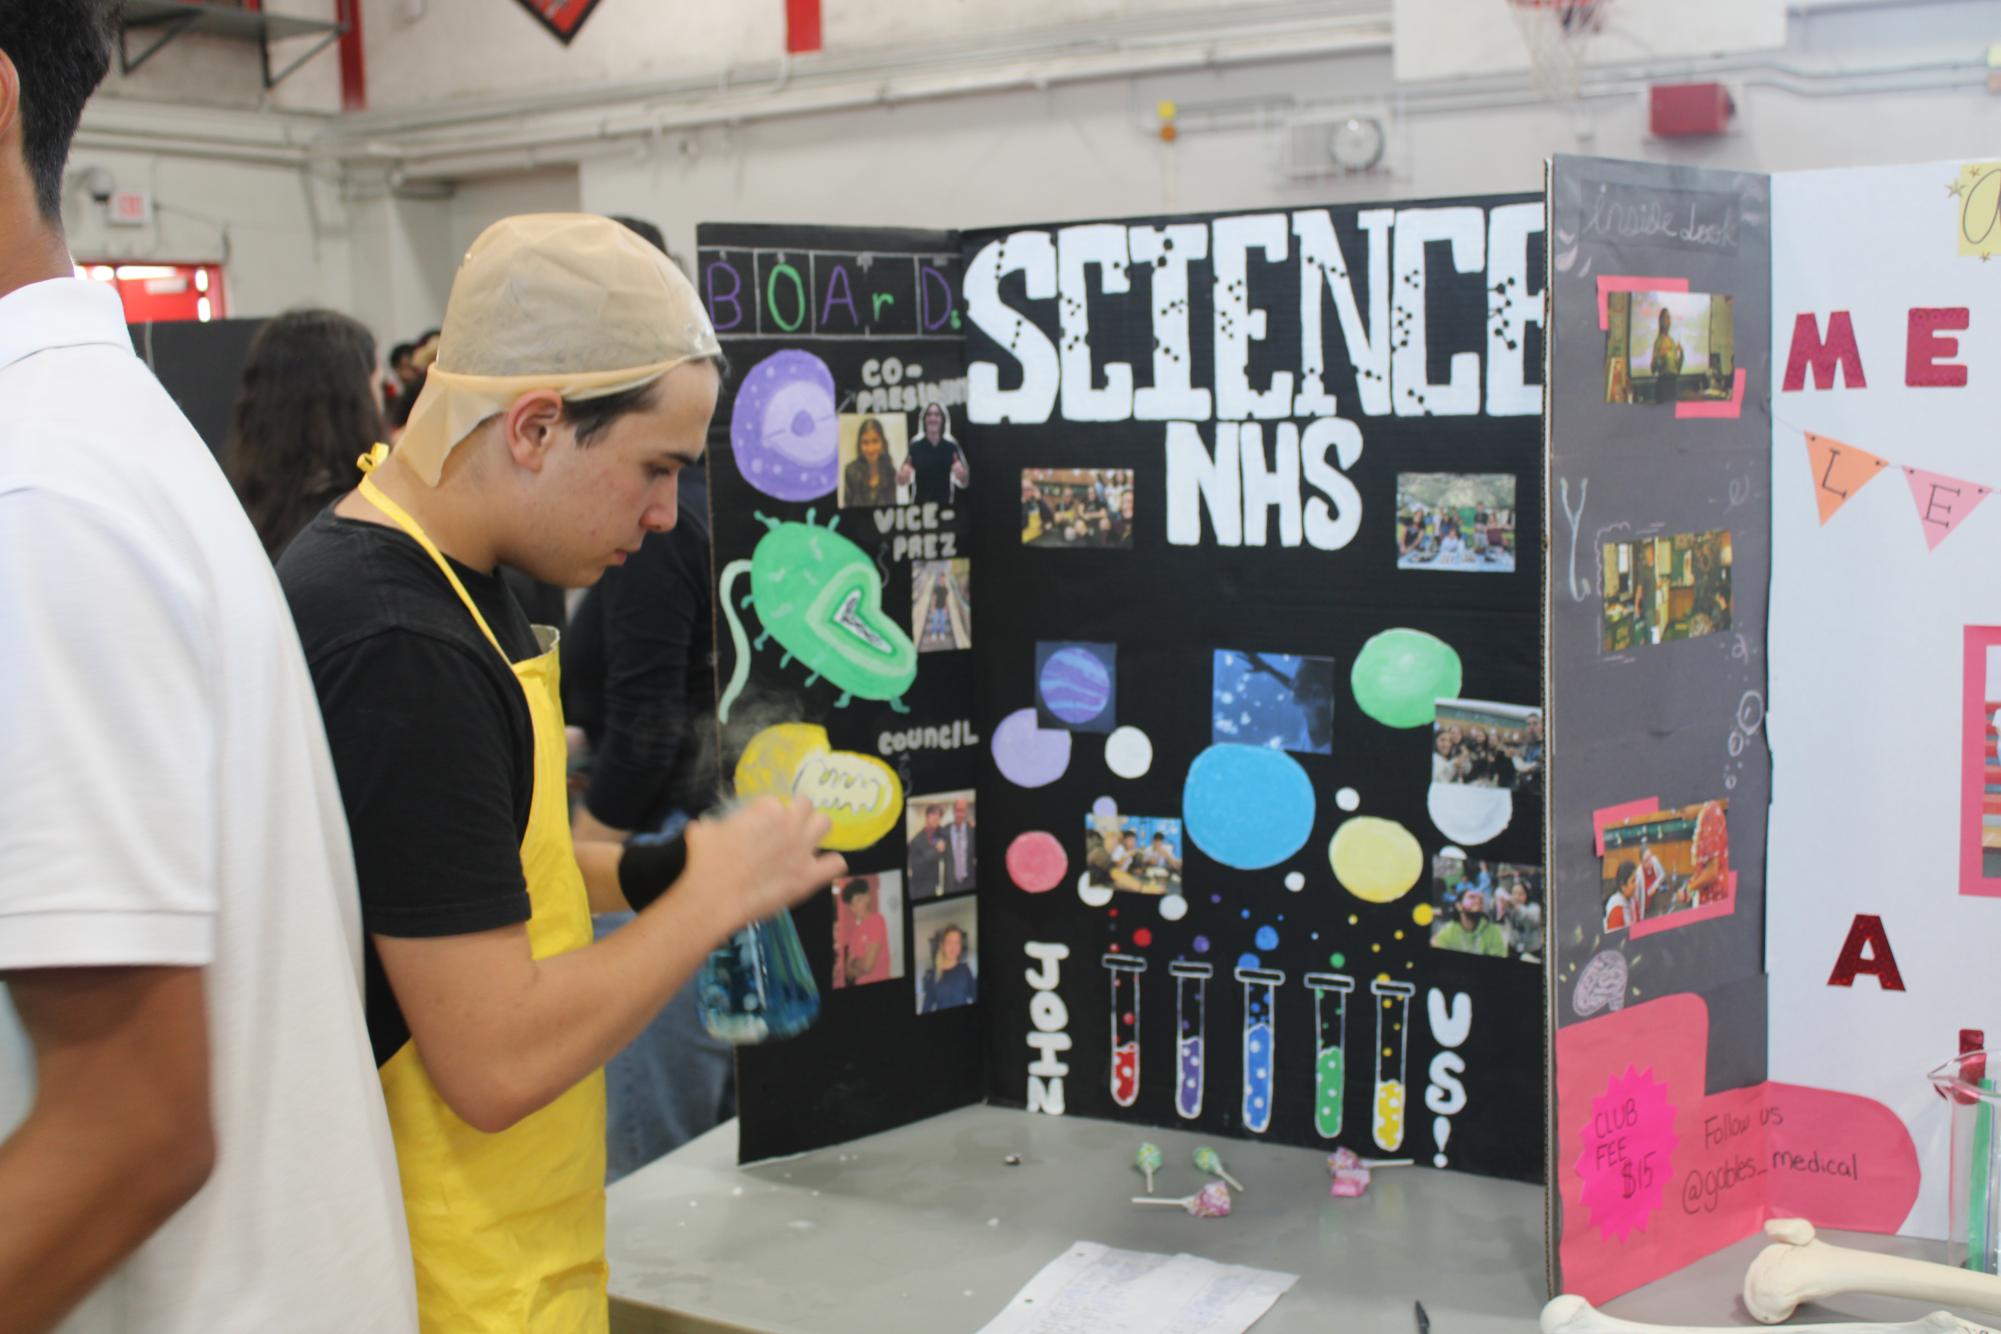 SNHS is an honor society focusing on scientific labs so students can experience the lab process and procedures.